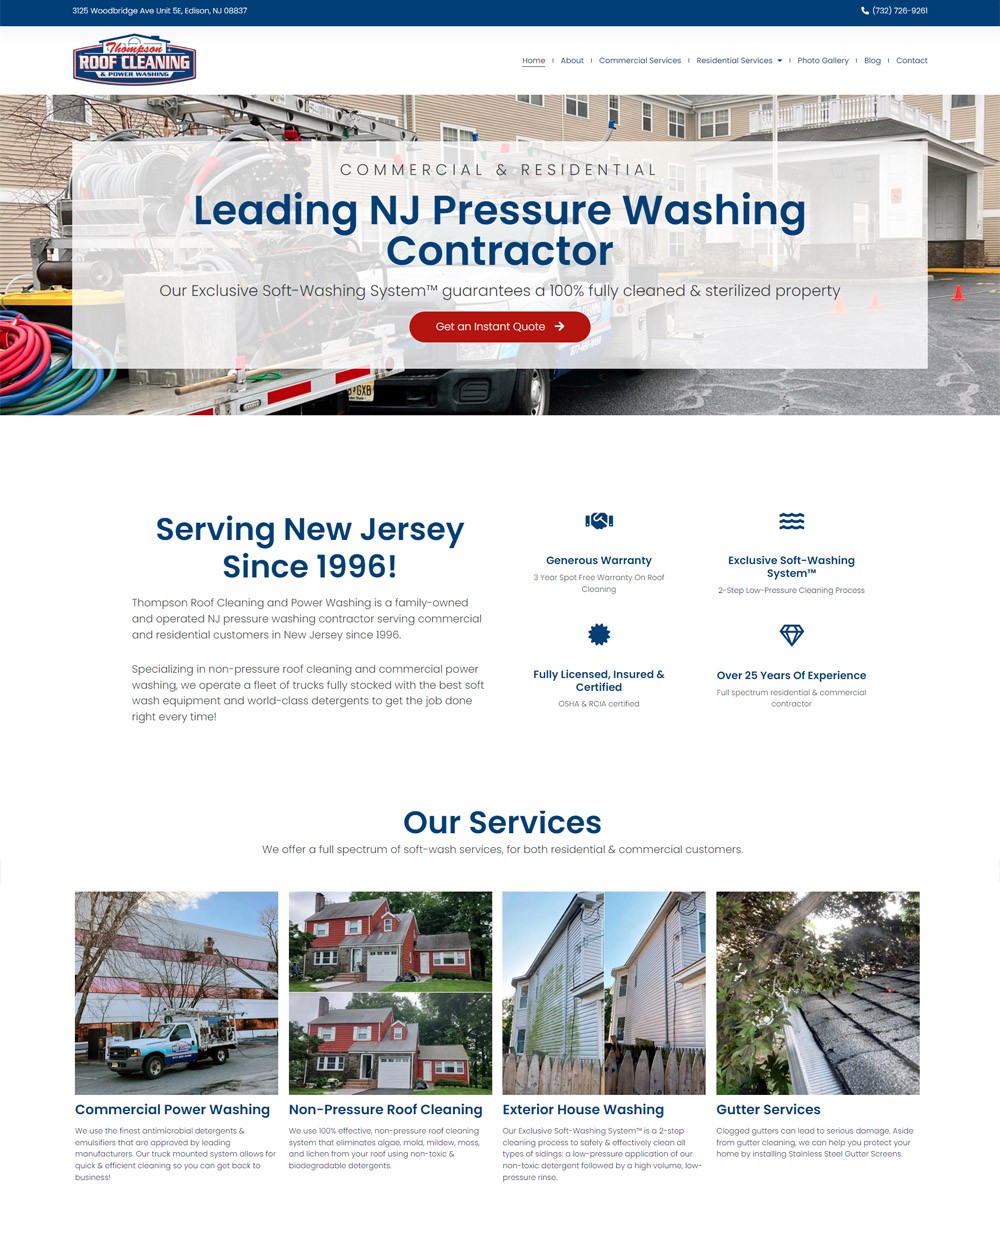 WordPress Website Redesign For a Local Pressure Washing Contractor